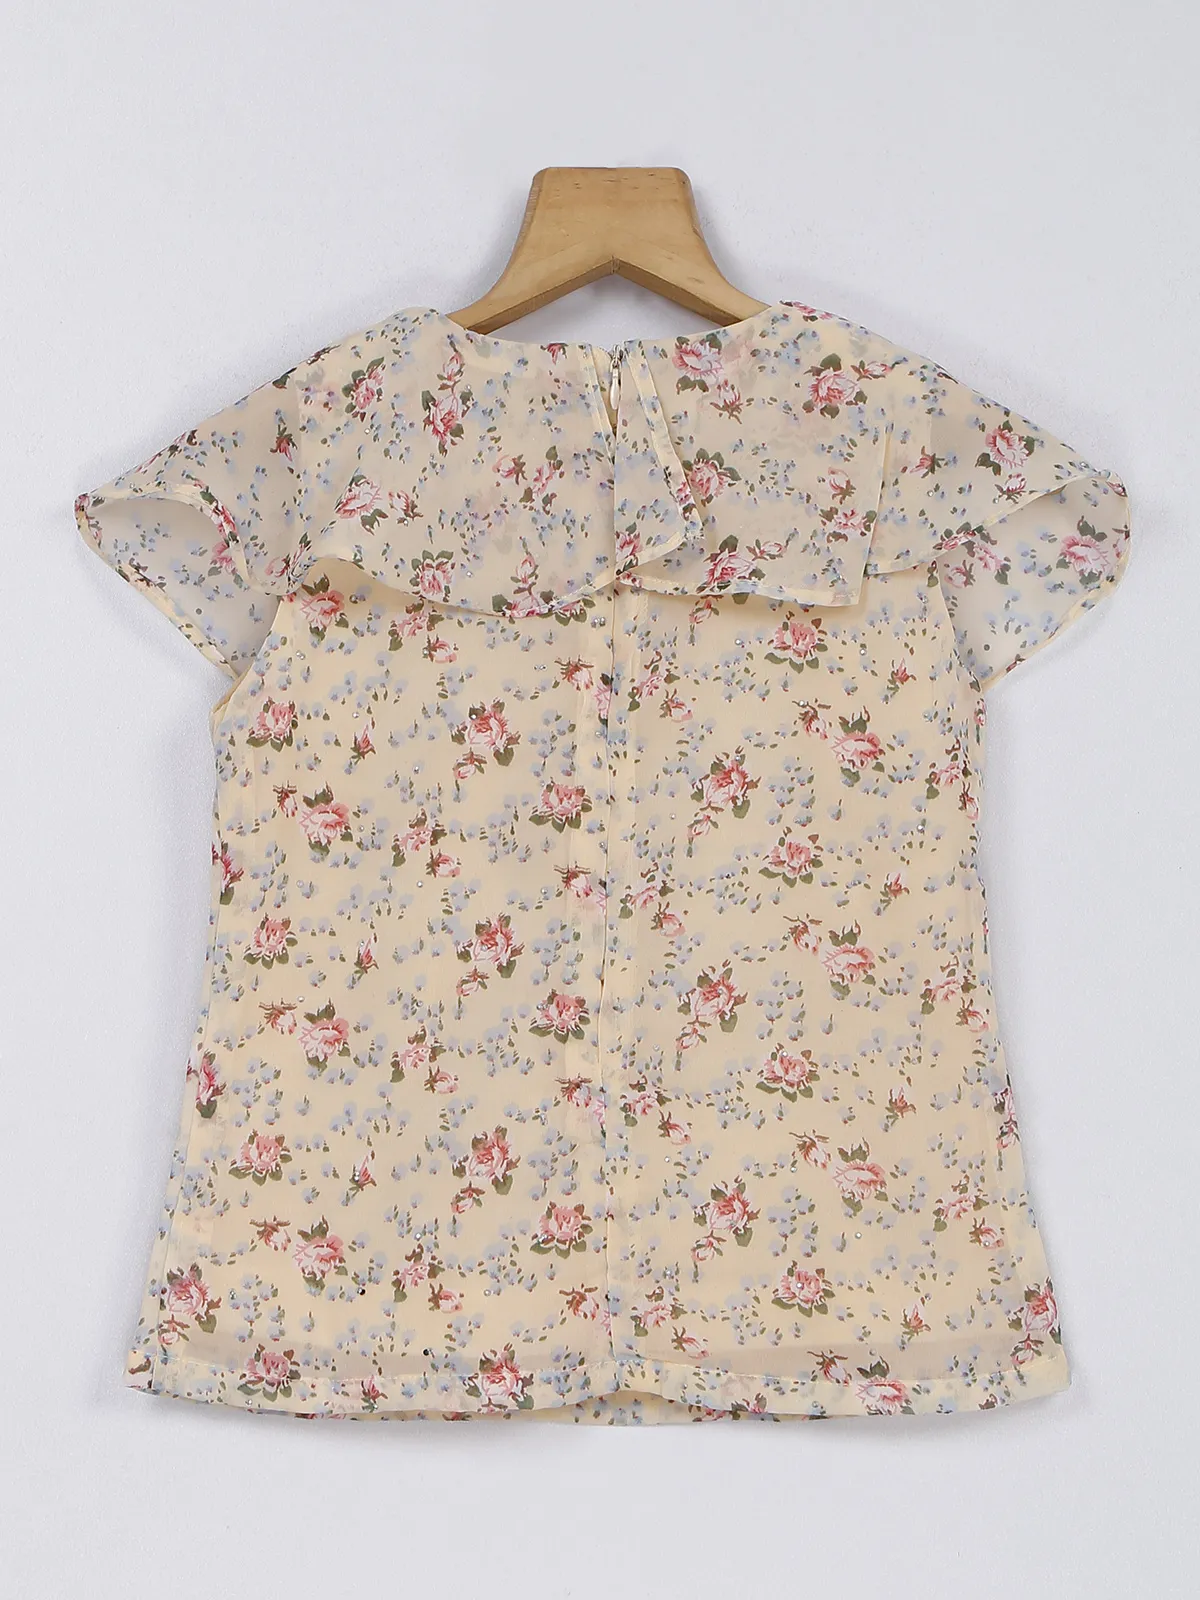 Tiny Girl light yellow printed georgette top